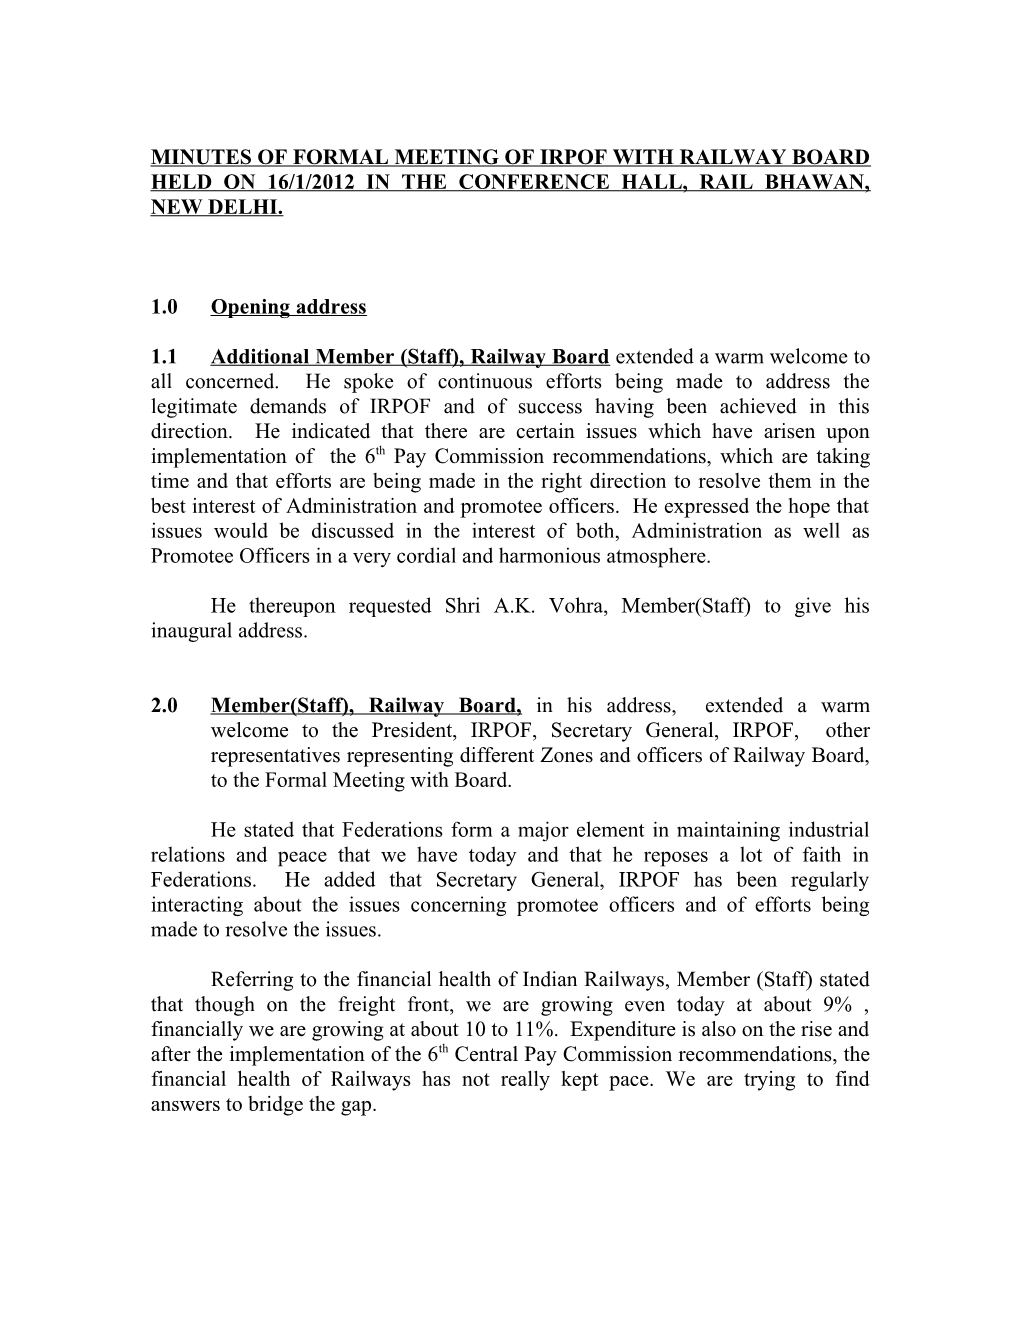 Minutes of Formal Meeting of Irpof with Railway Board Held on 16/1/2012 in the Conference